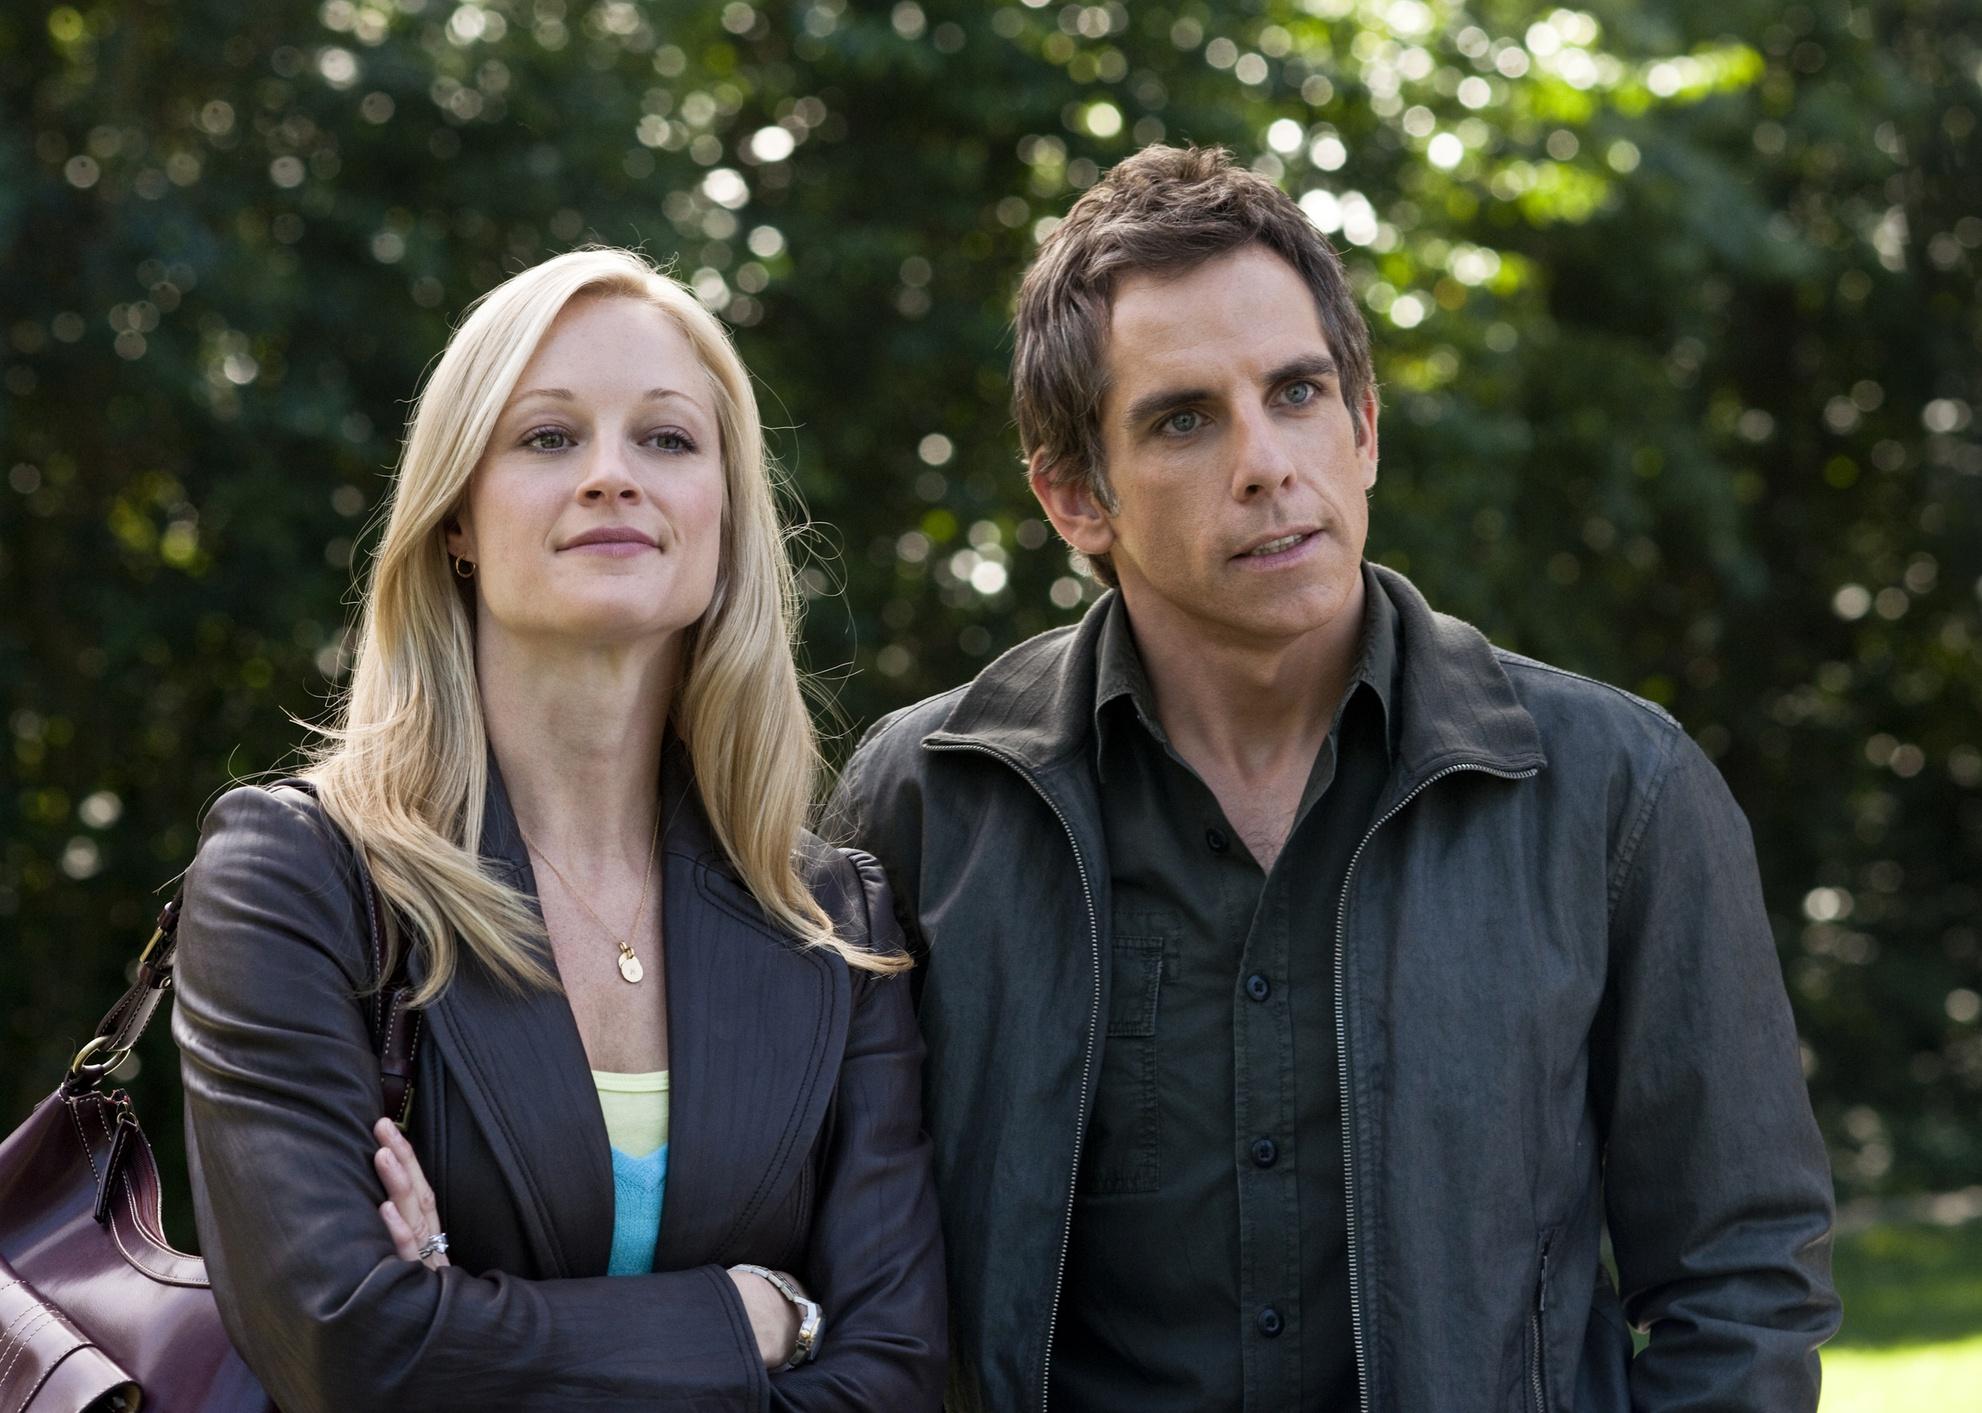 Teri Polo and Ben Stiller looking annoyed.